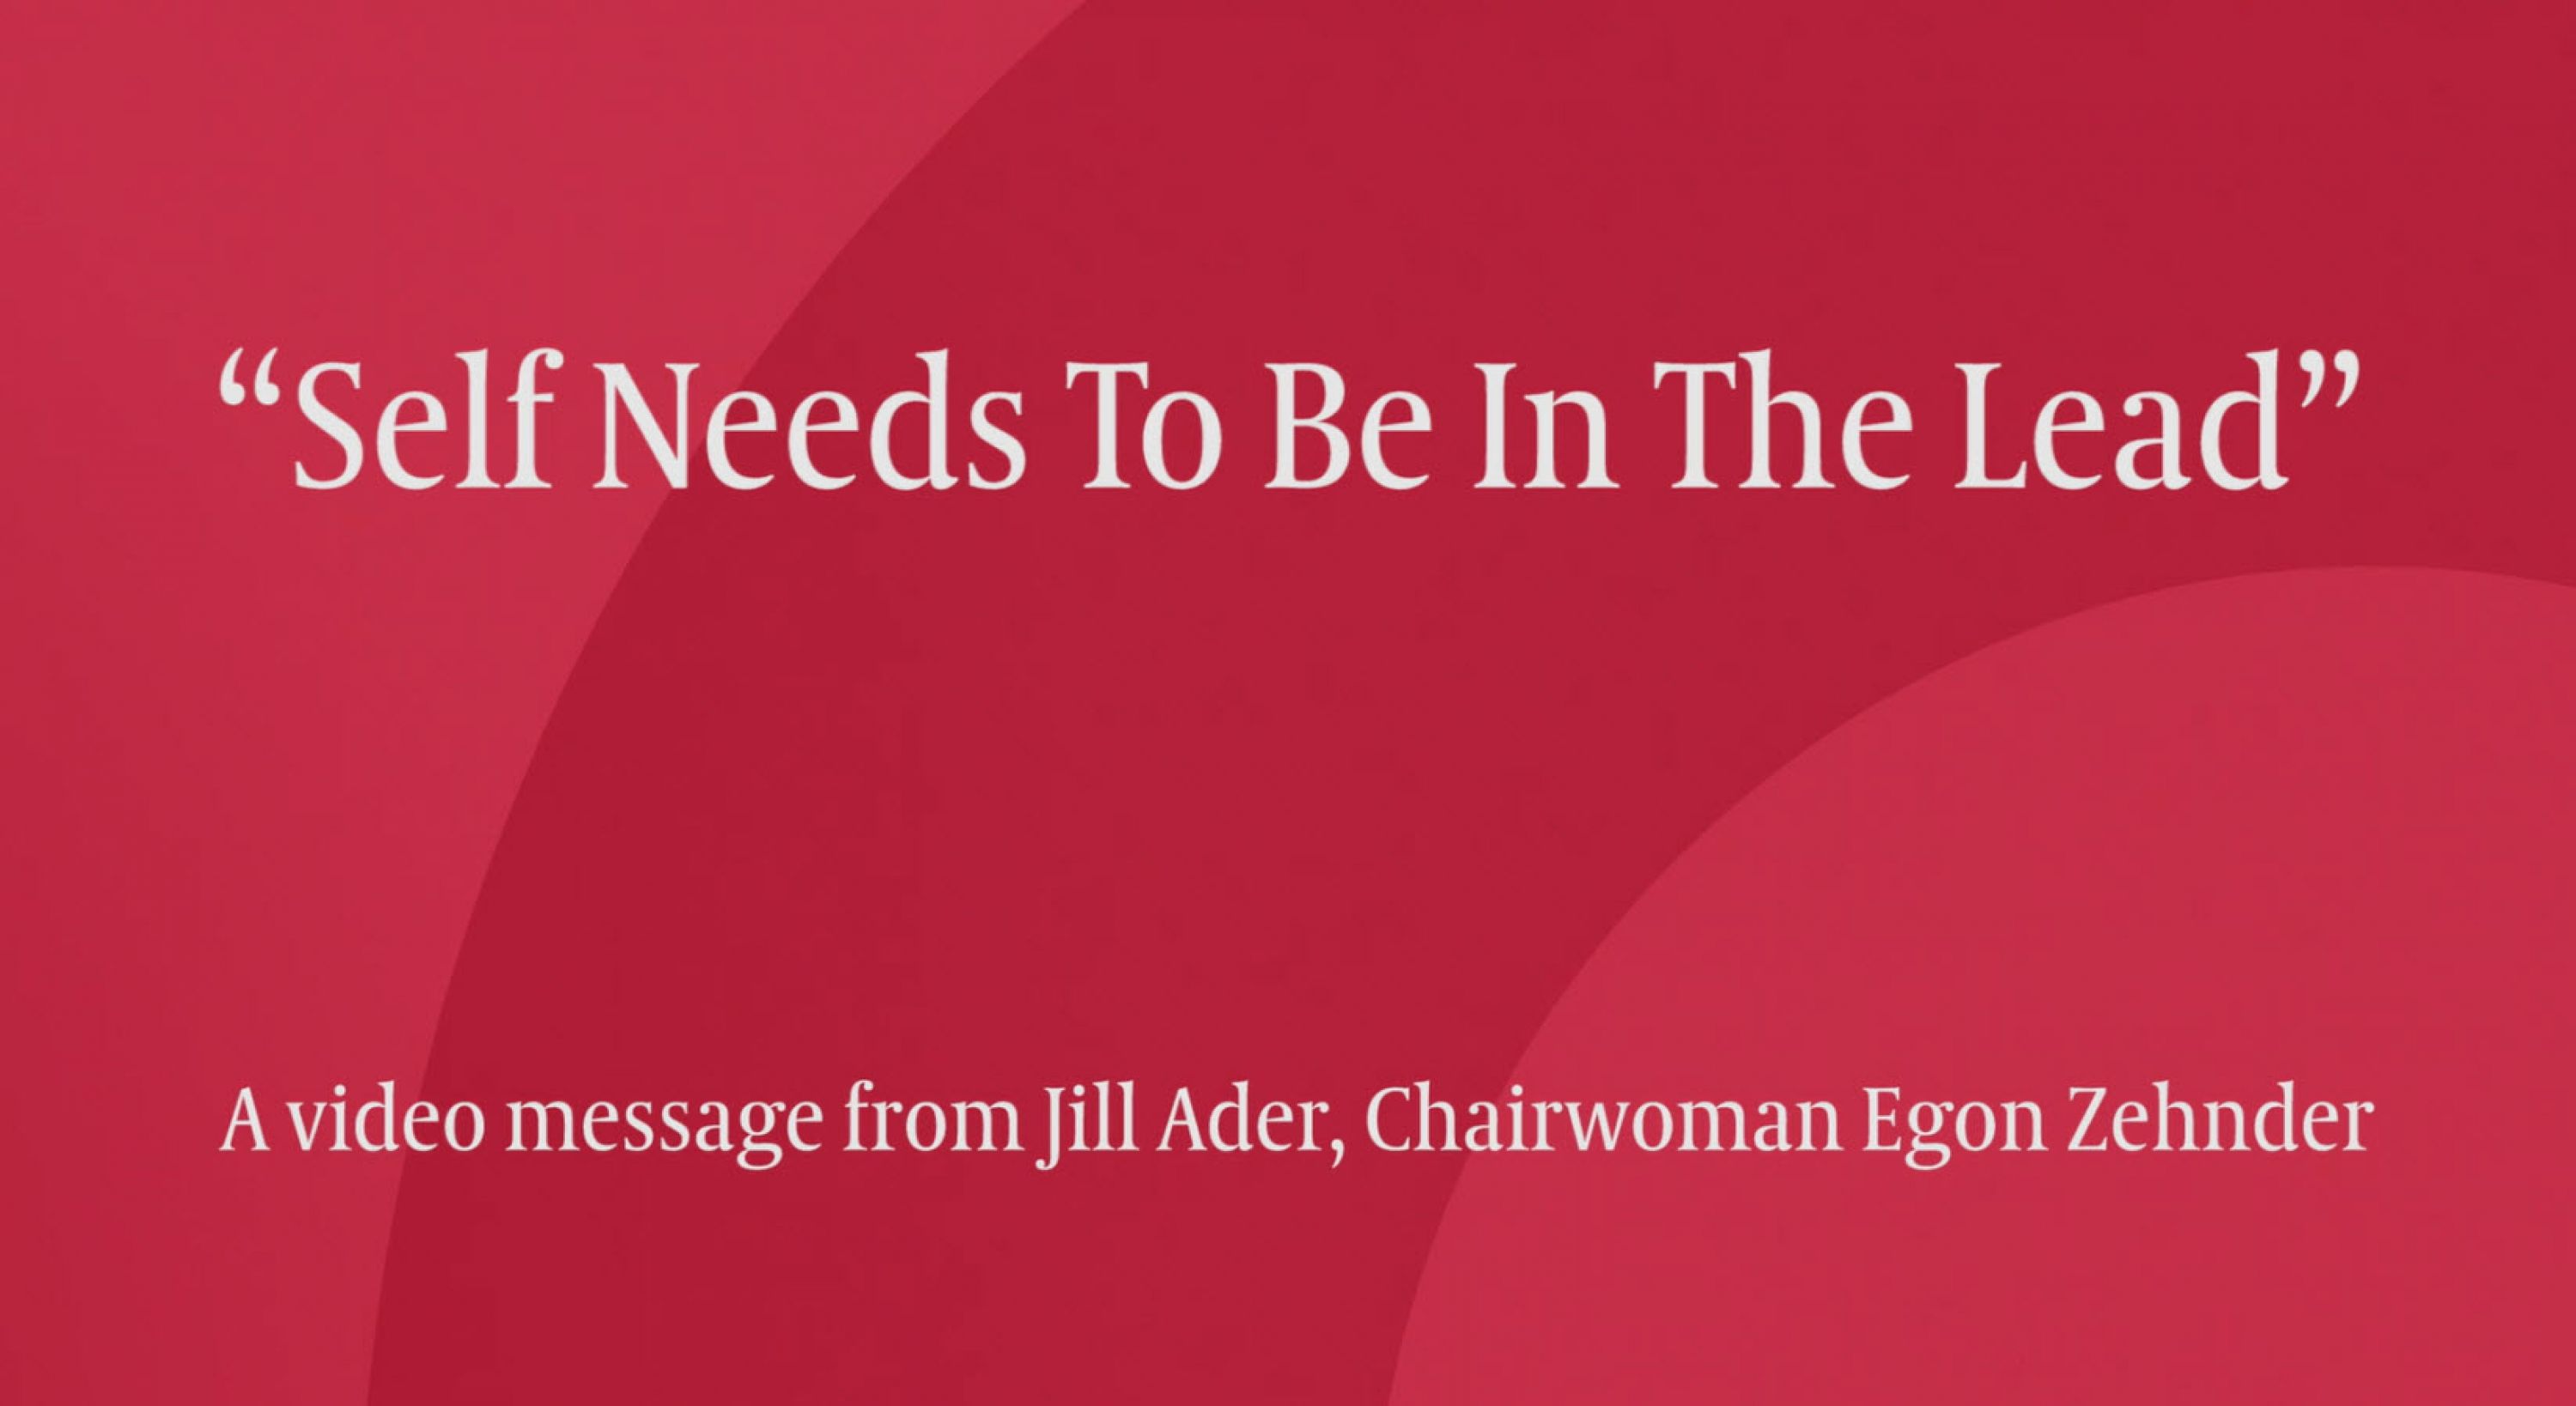 Watch Chairwoman Jill Ader's message to leaders